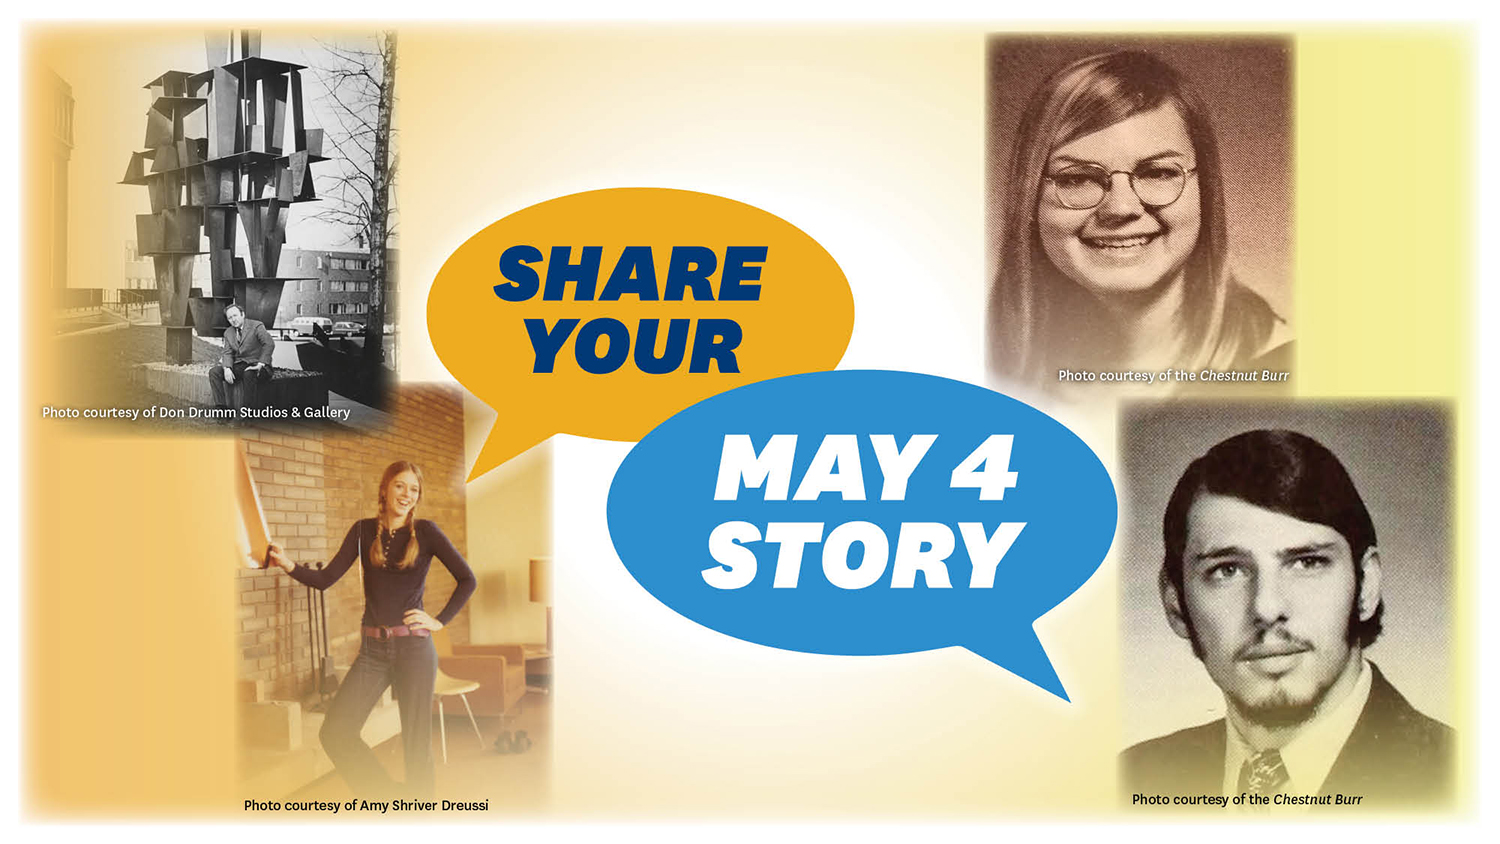 Share Your May 4 Story